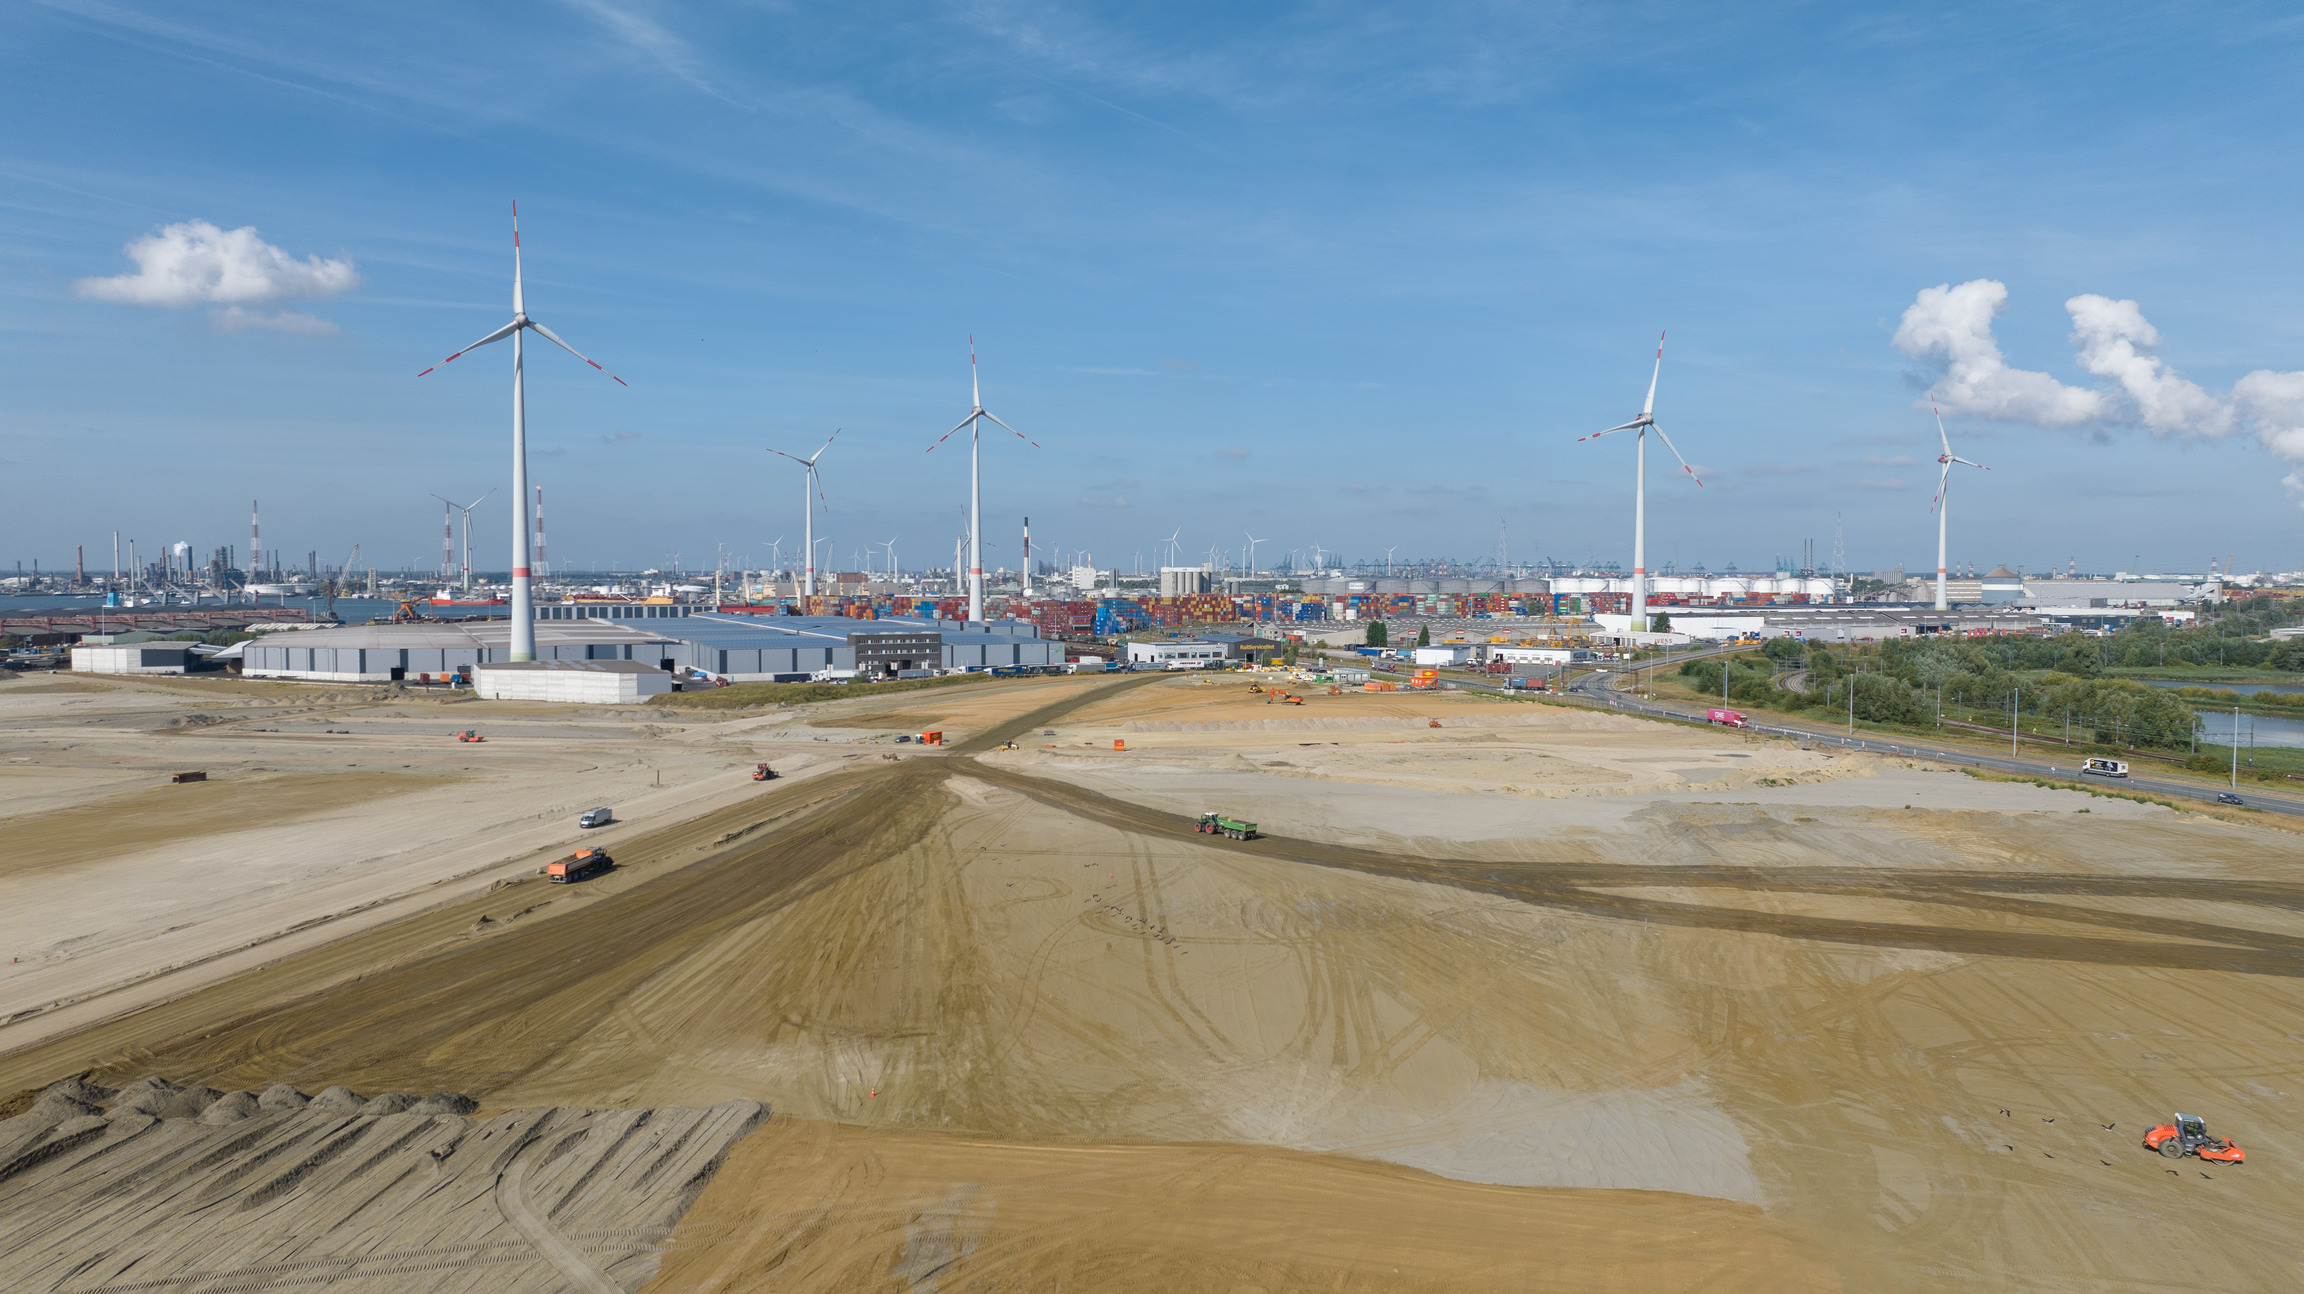 PureCycle and Port of Antwerp-Bruges announce NextGen District as location for PureCycle’s first plastic recycling plant in Europe